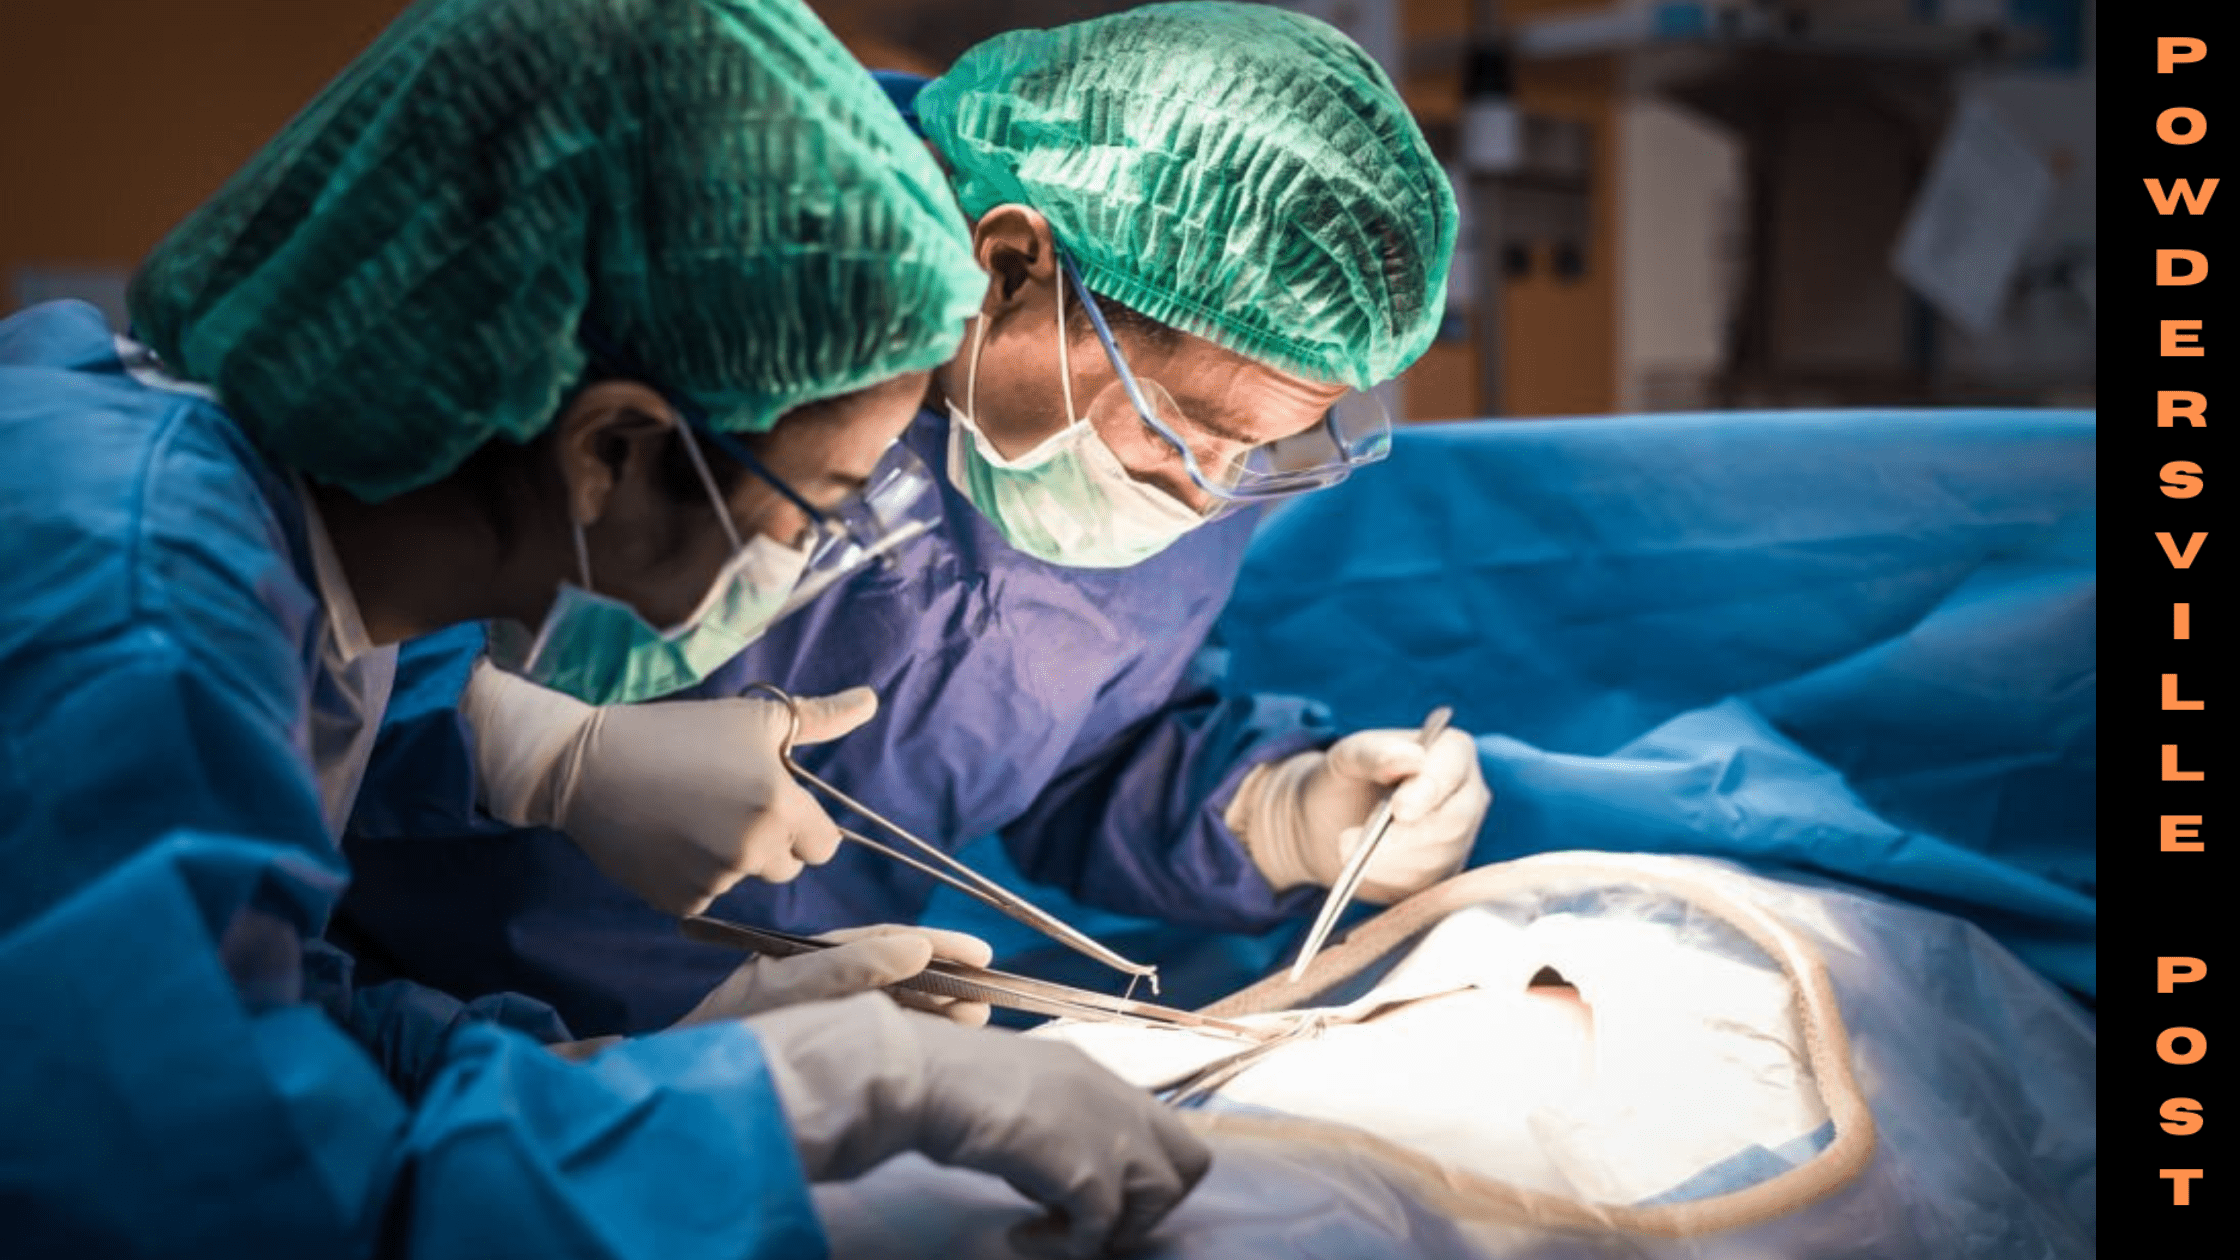 Efficiency-Of-Organ-Transplant-Process-In-The-US-To-Be-Optimized